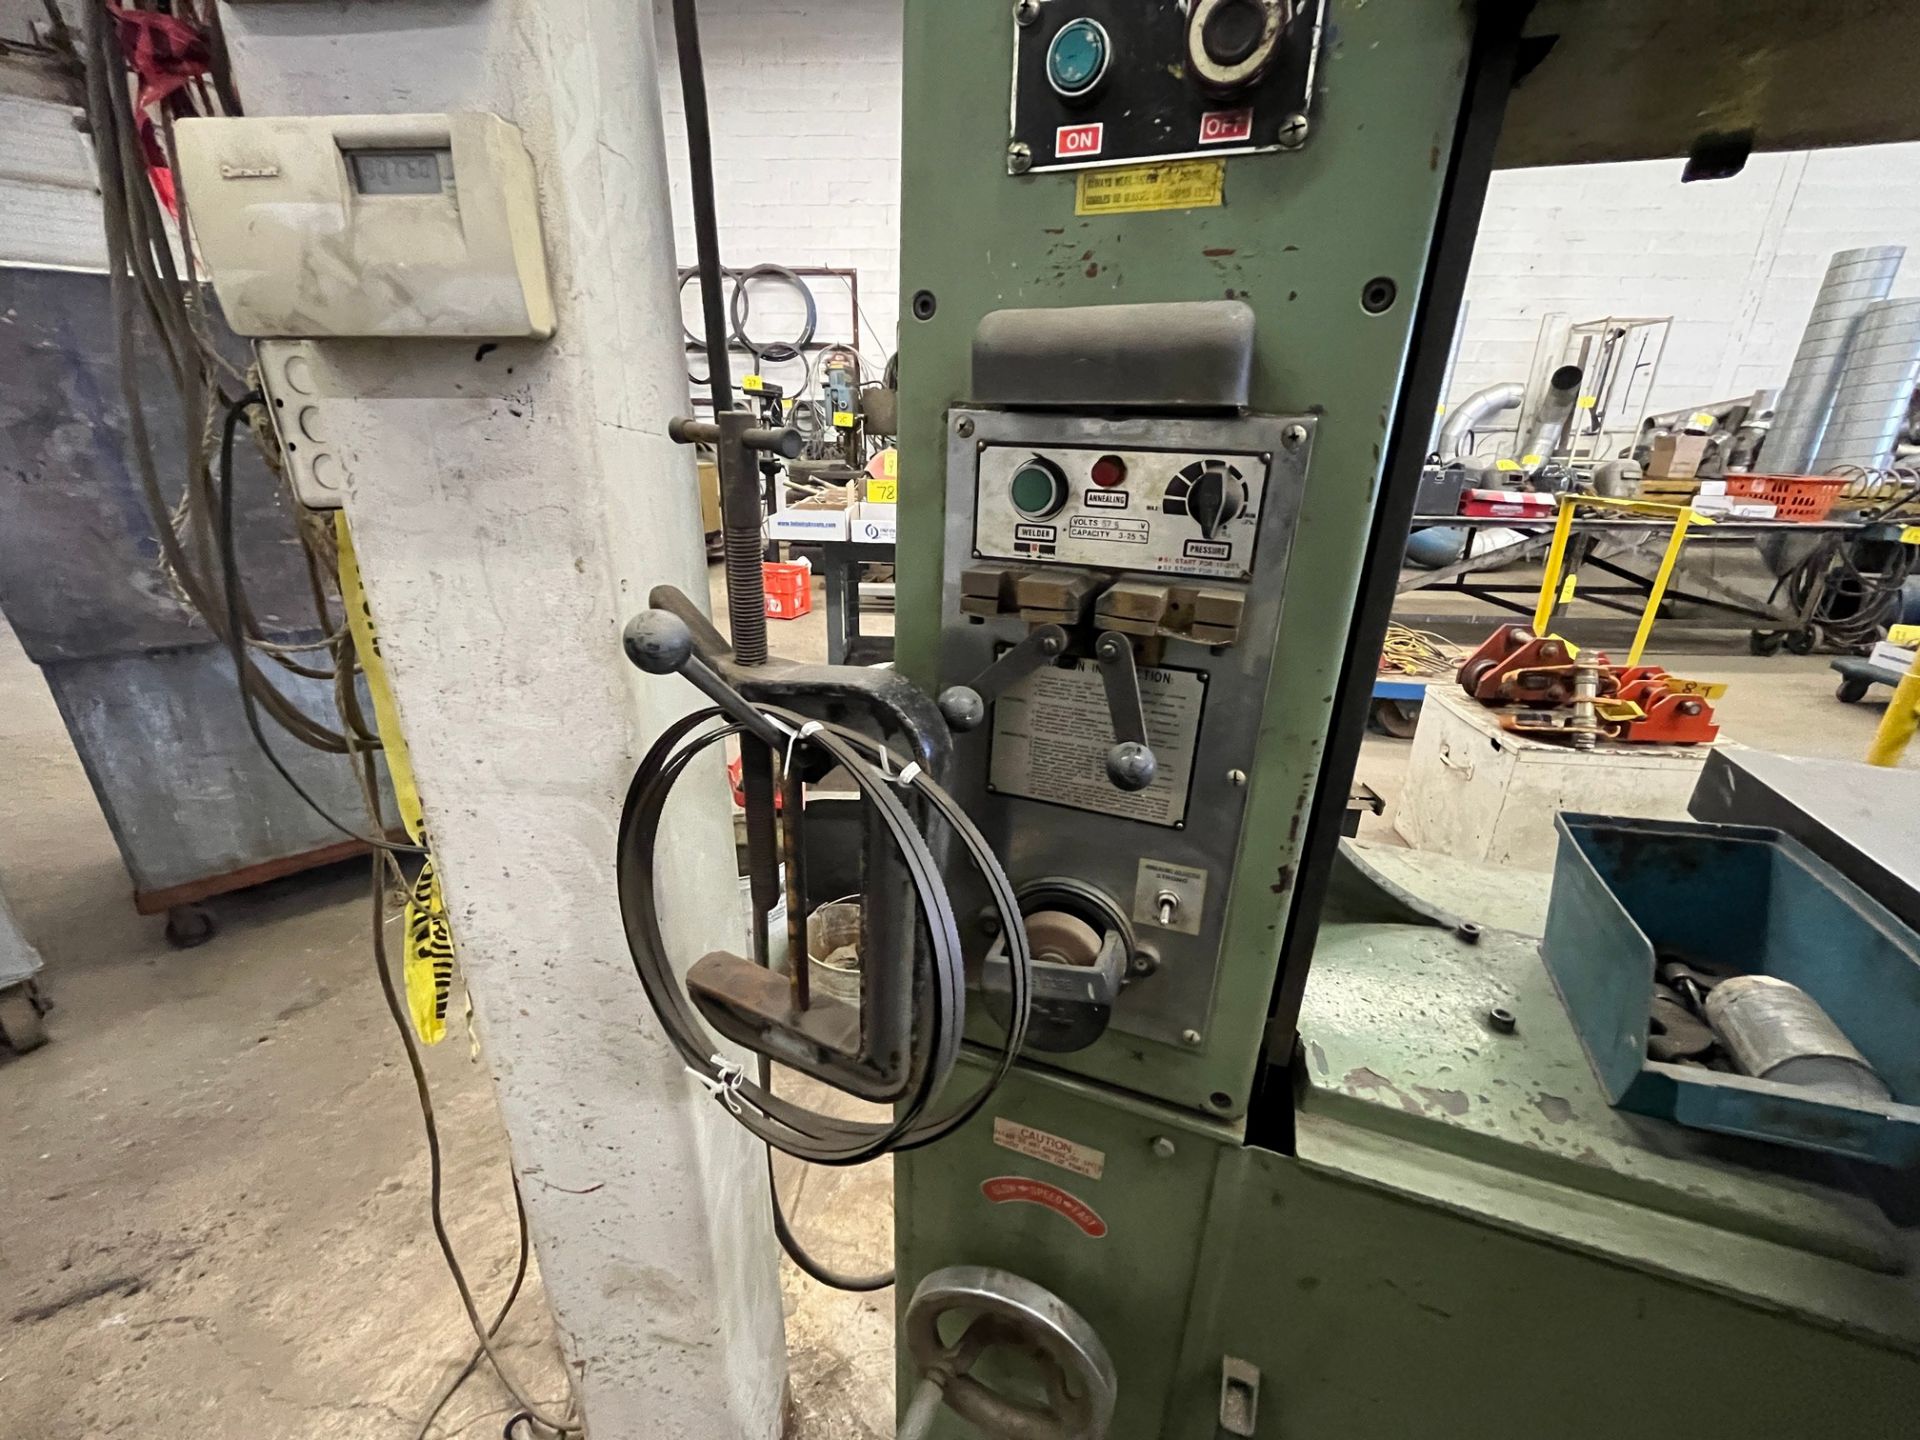 T-JAW T-500 VERTICAL BANDSAW, VARIABLE SPEED, 575V, 28" THROAT, 29" X 27" TABLE, BLADE WELDER, SPARE - Image 6 of 9